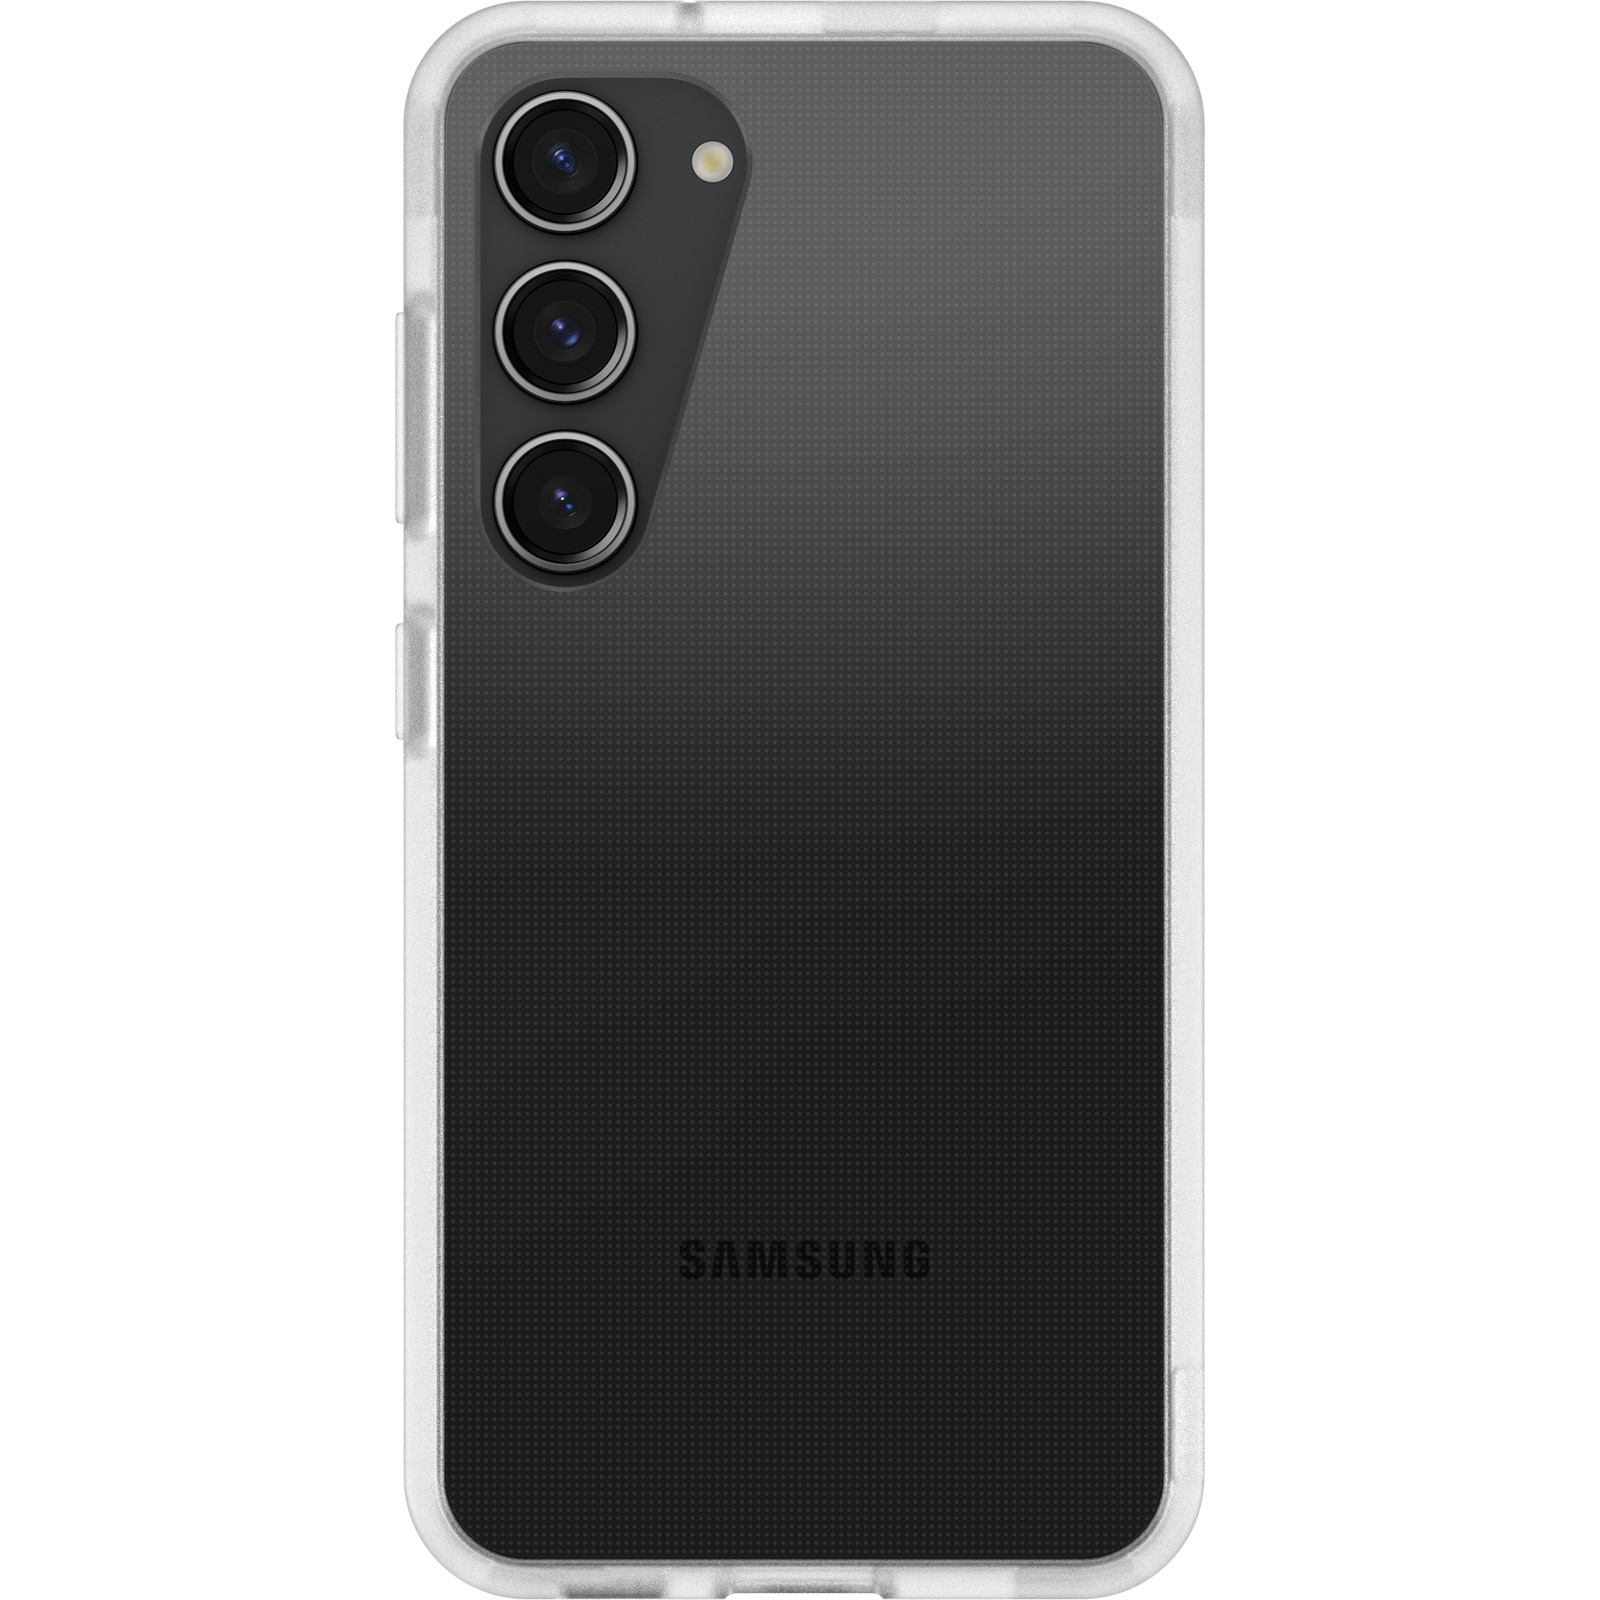 Cover React Samsung Galaxy S23 Clear